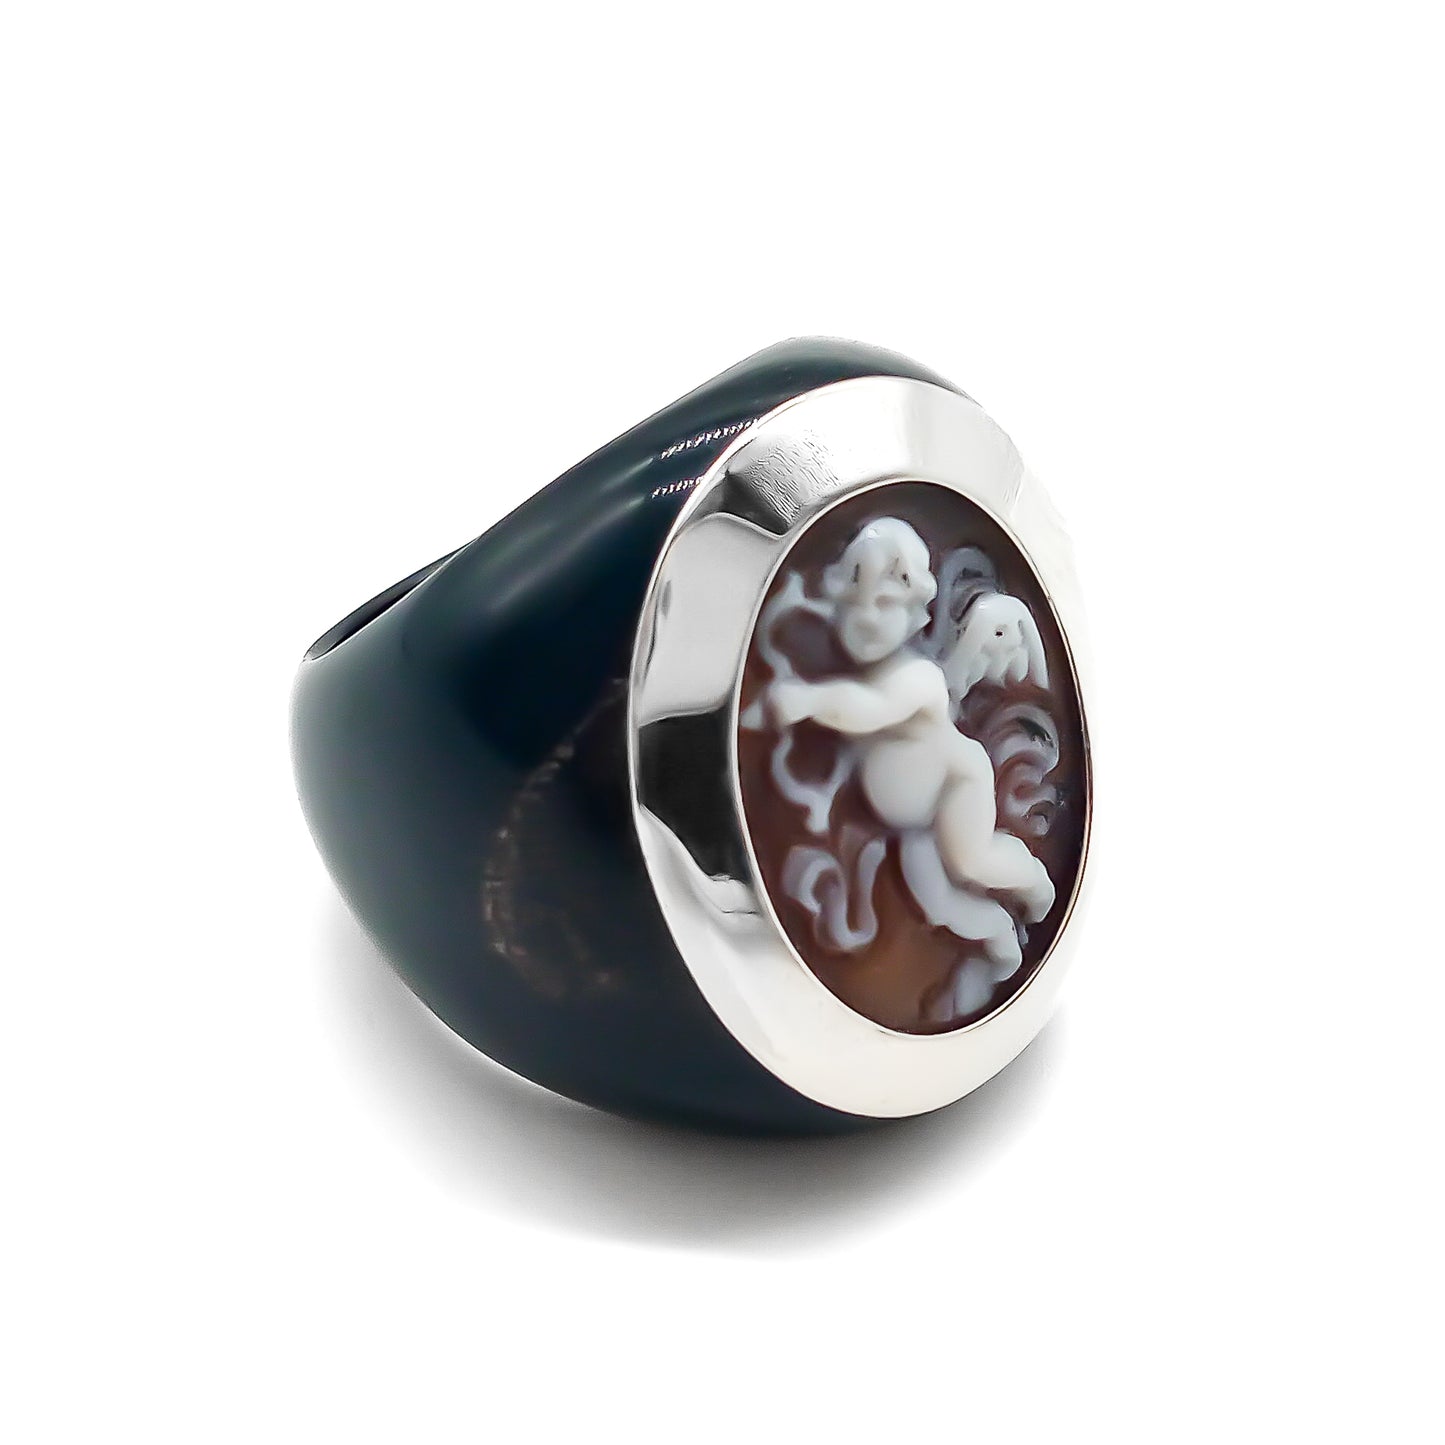 Sterling silver and horn vintage ring set with an exquisite cameo depicting a cherub with an arrow and a bow.